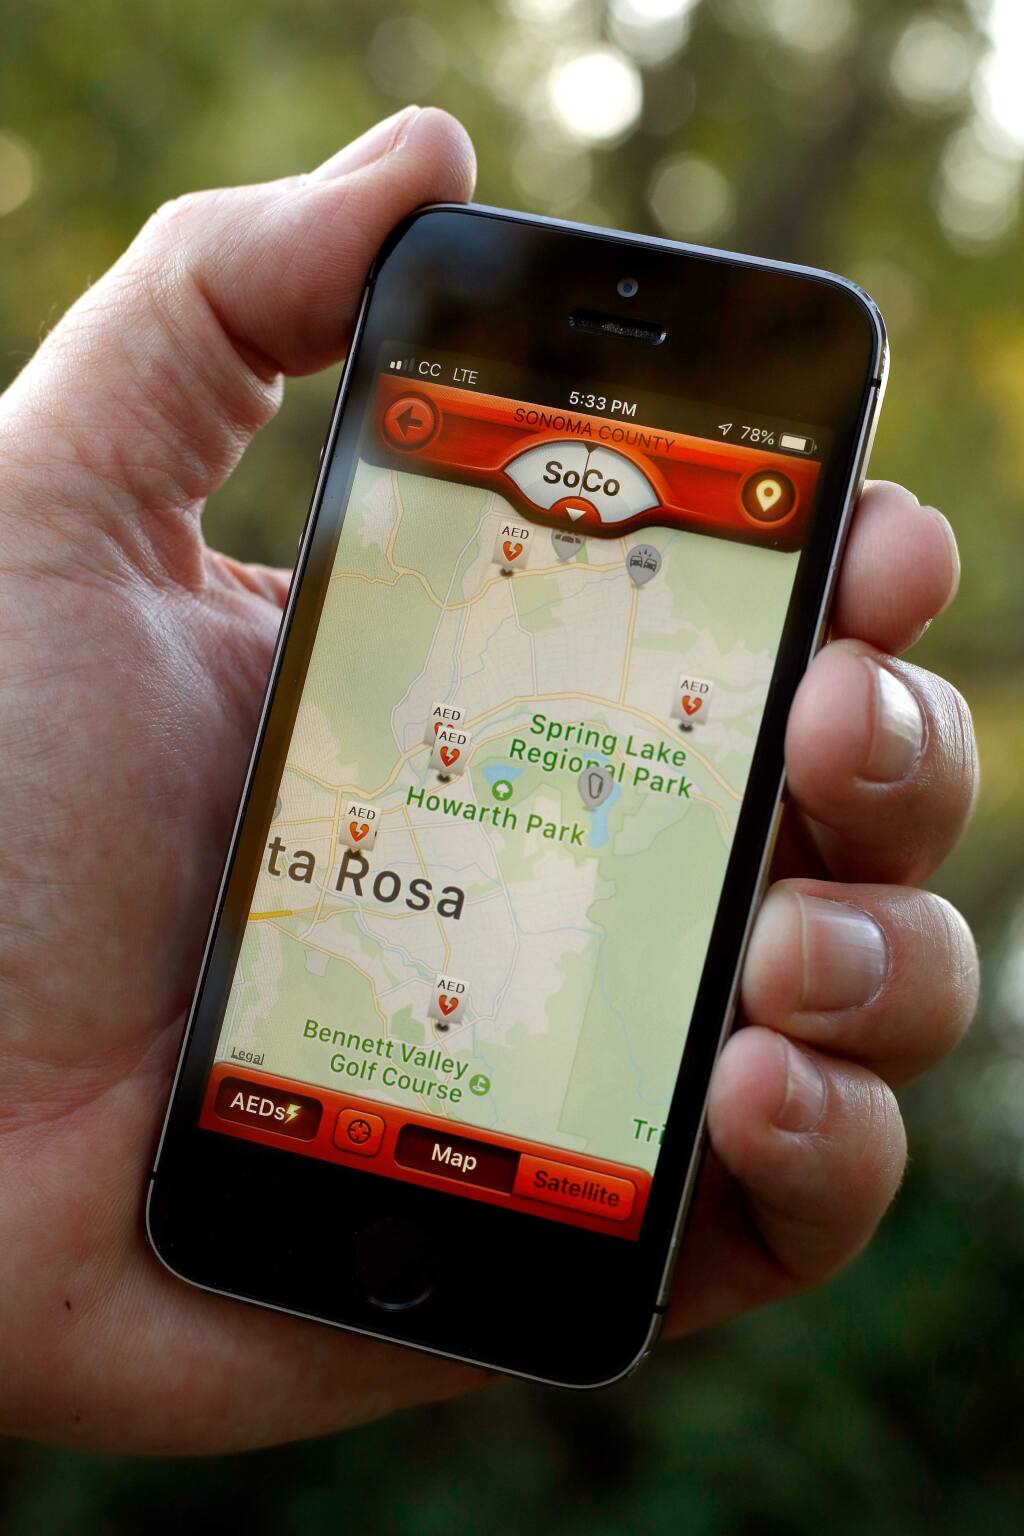 Dave Smith of Save Lives Sonoma holds his smartphone with the PulsePoint Respond app showing a map of automated external defibrillators locations around Spring Lake Park in Santa Rosa, California, on Friday, October 19, 2018. (Alvin Jornada / The Press Democrat)